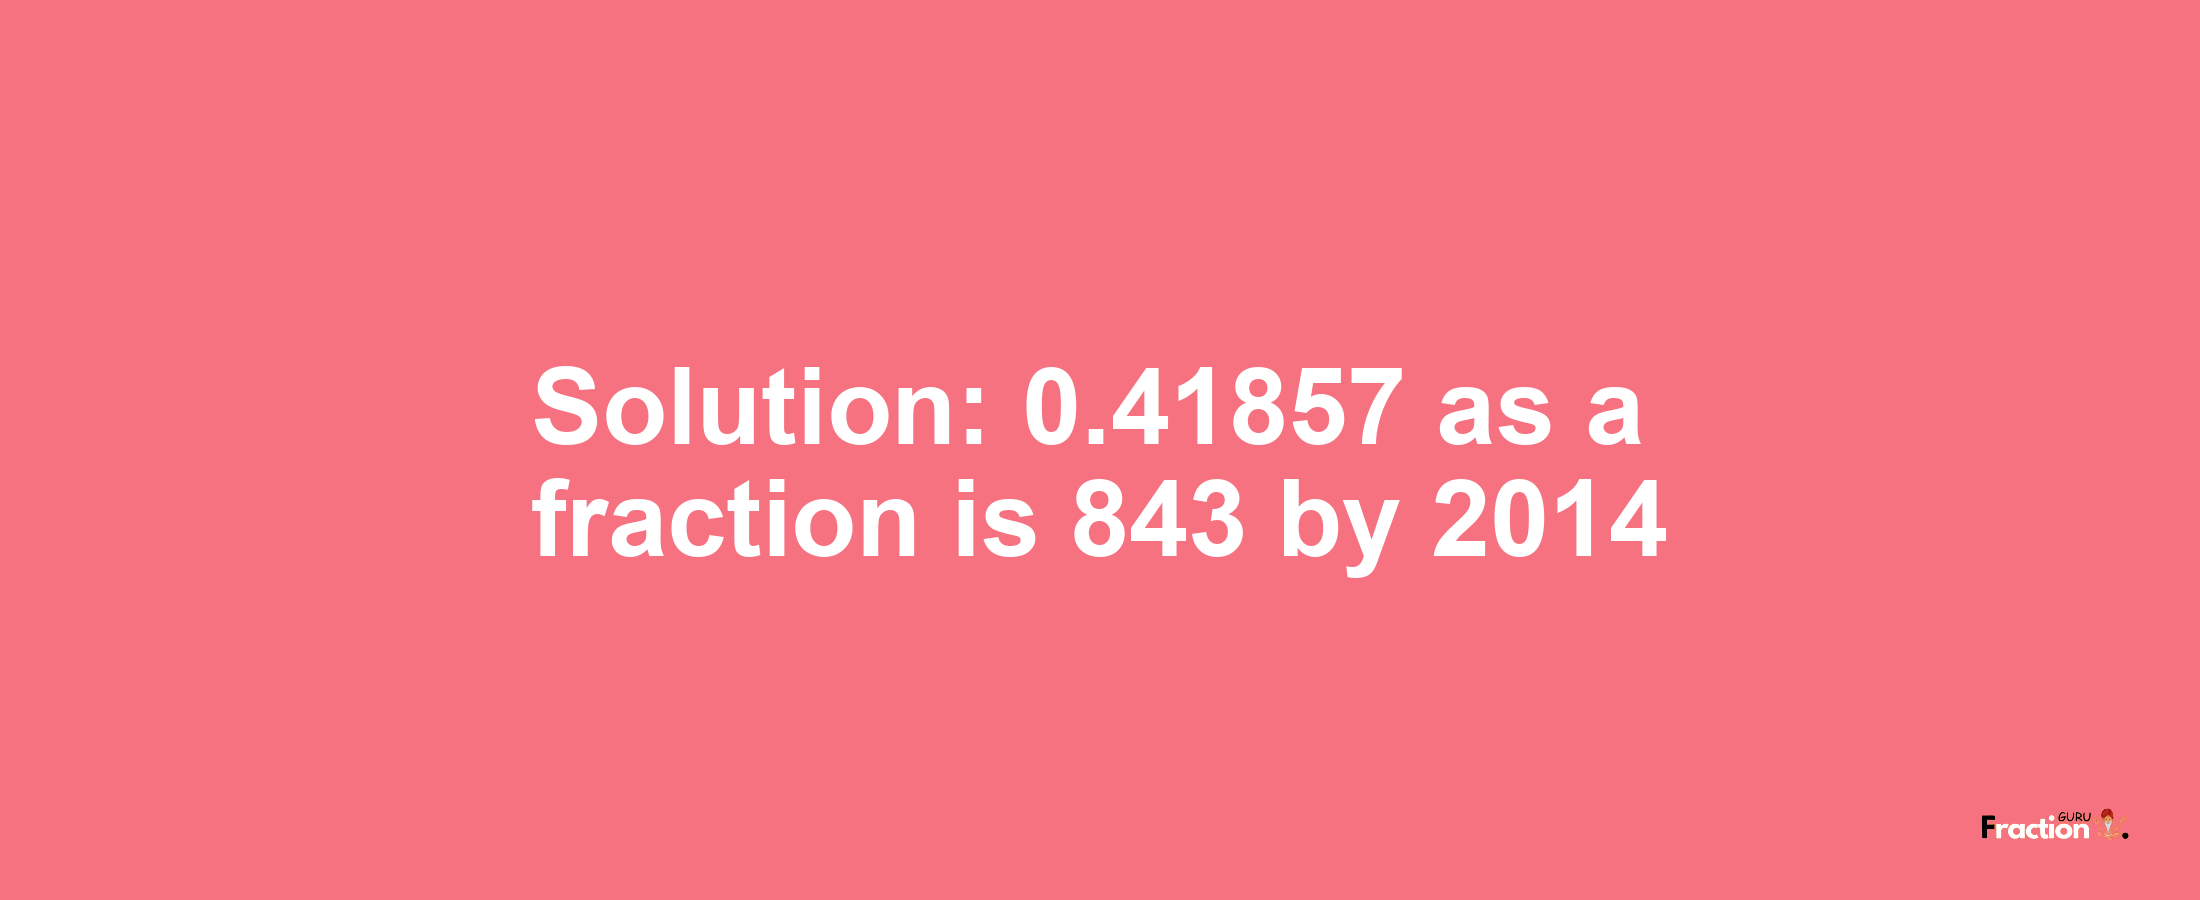 Solution:0.41857 as a fraction is 843/2014